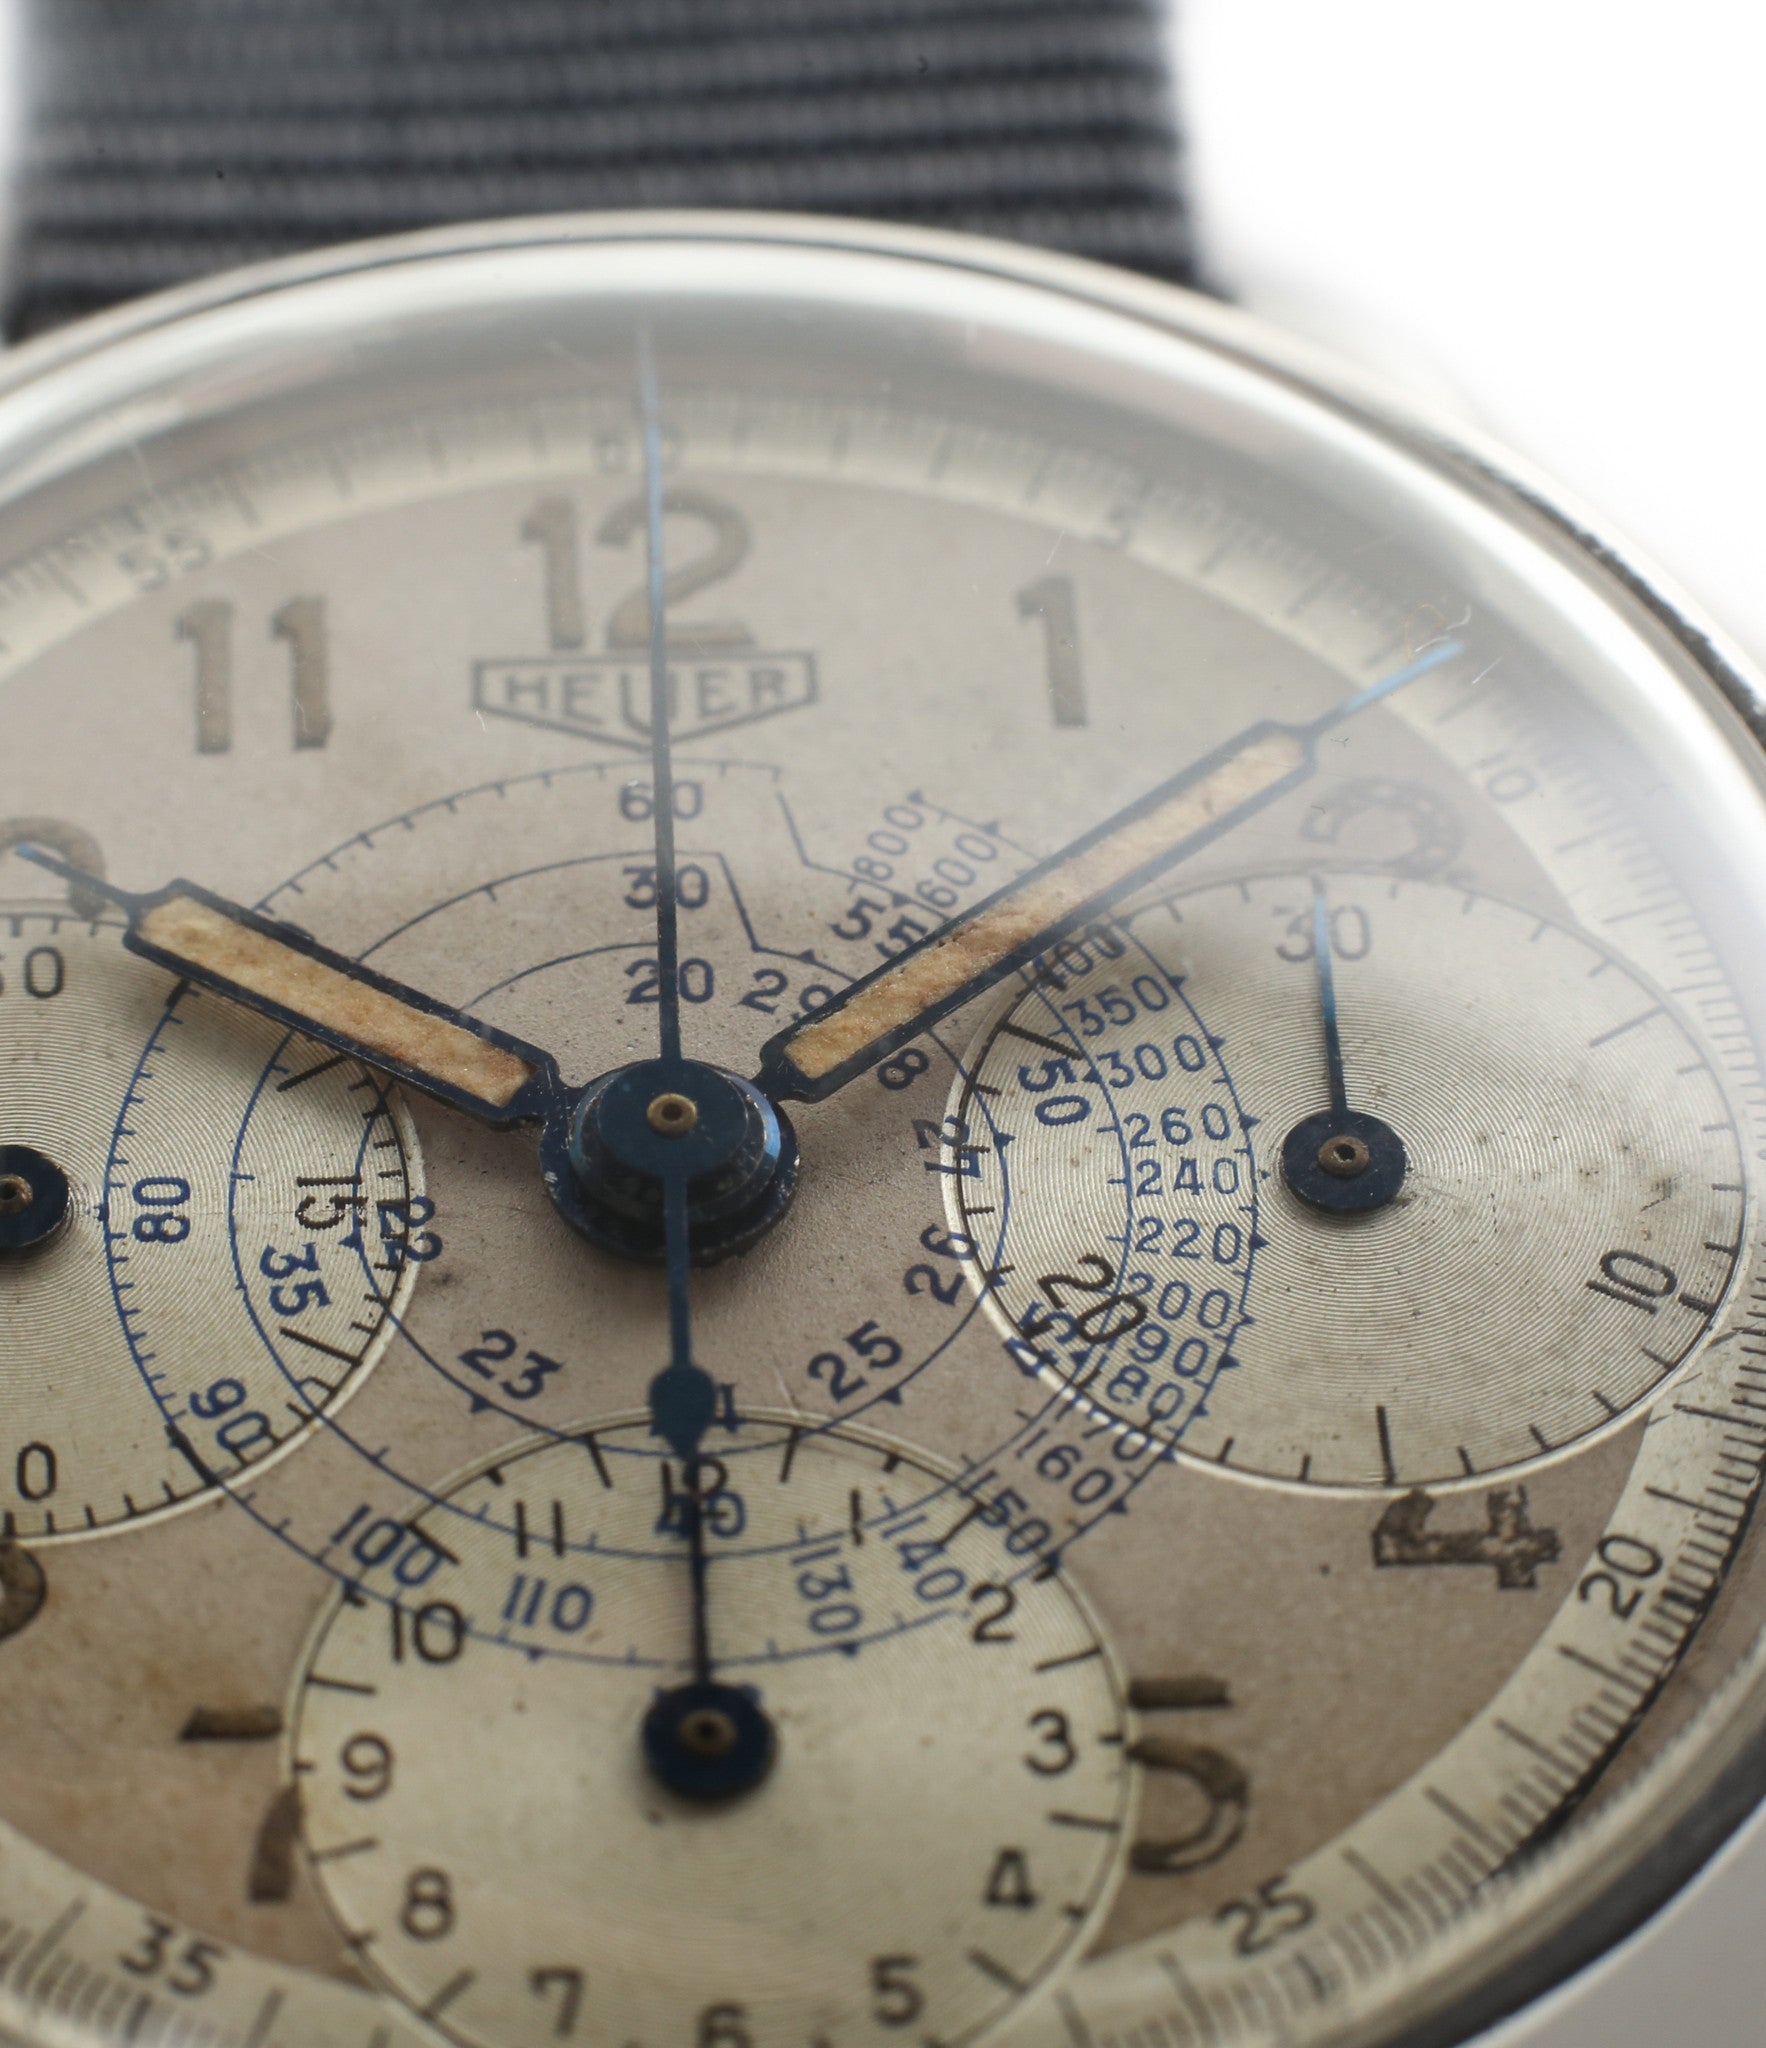 tachymeter vintage Heuer Chronograph steel watch online at A Collected Man London